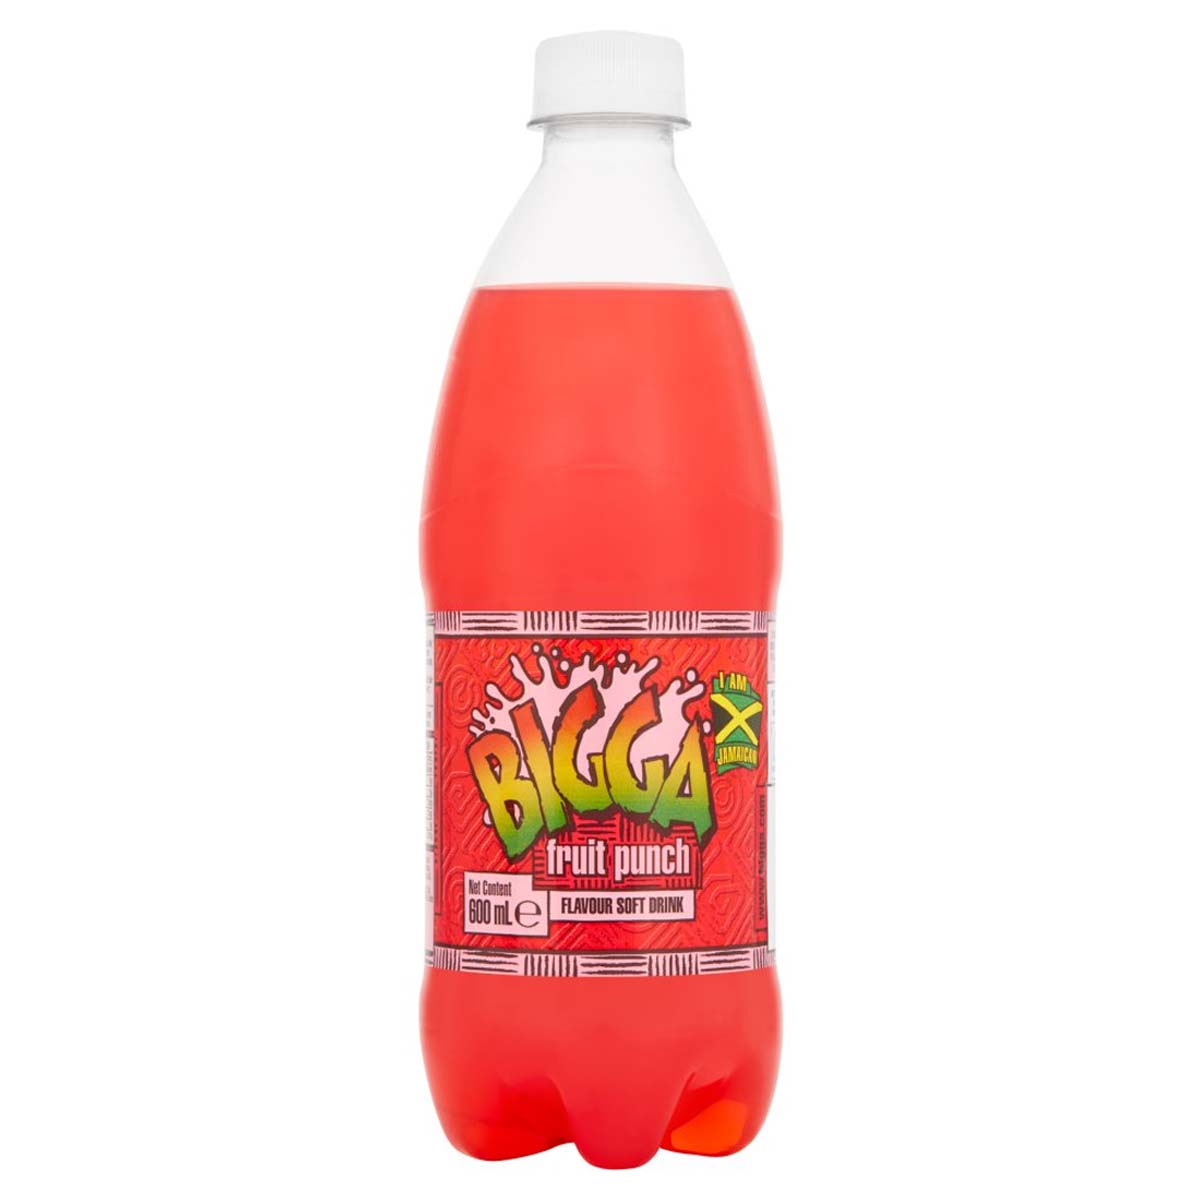 Bigga - Fruit Punch Flavour Soft Drink - 600ml - Continental Food Store